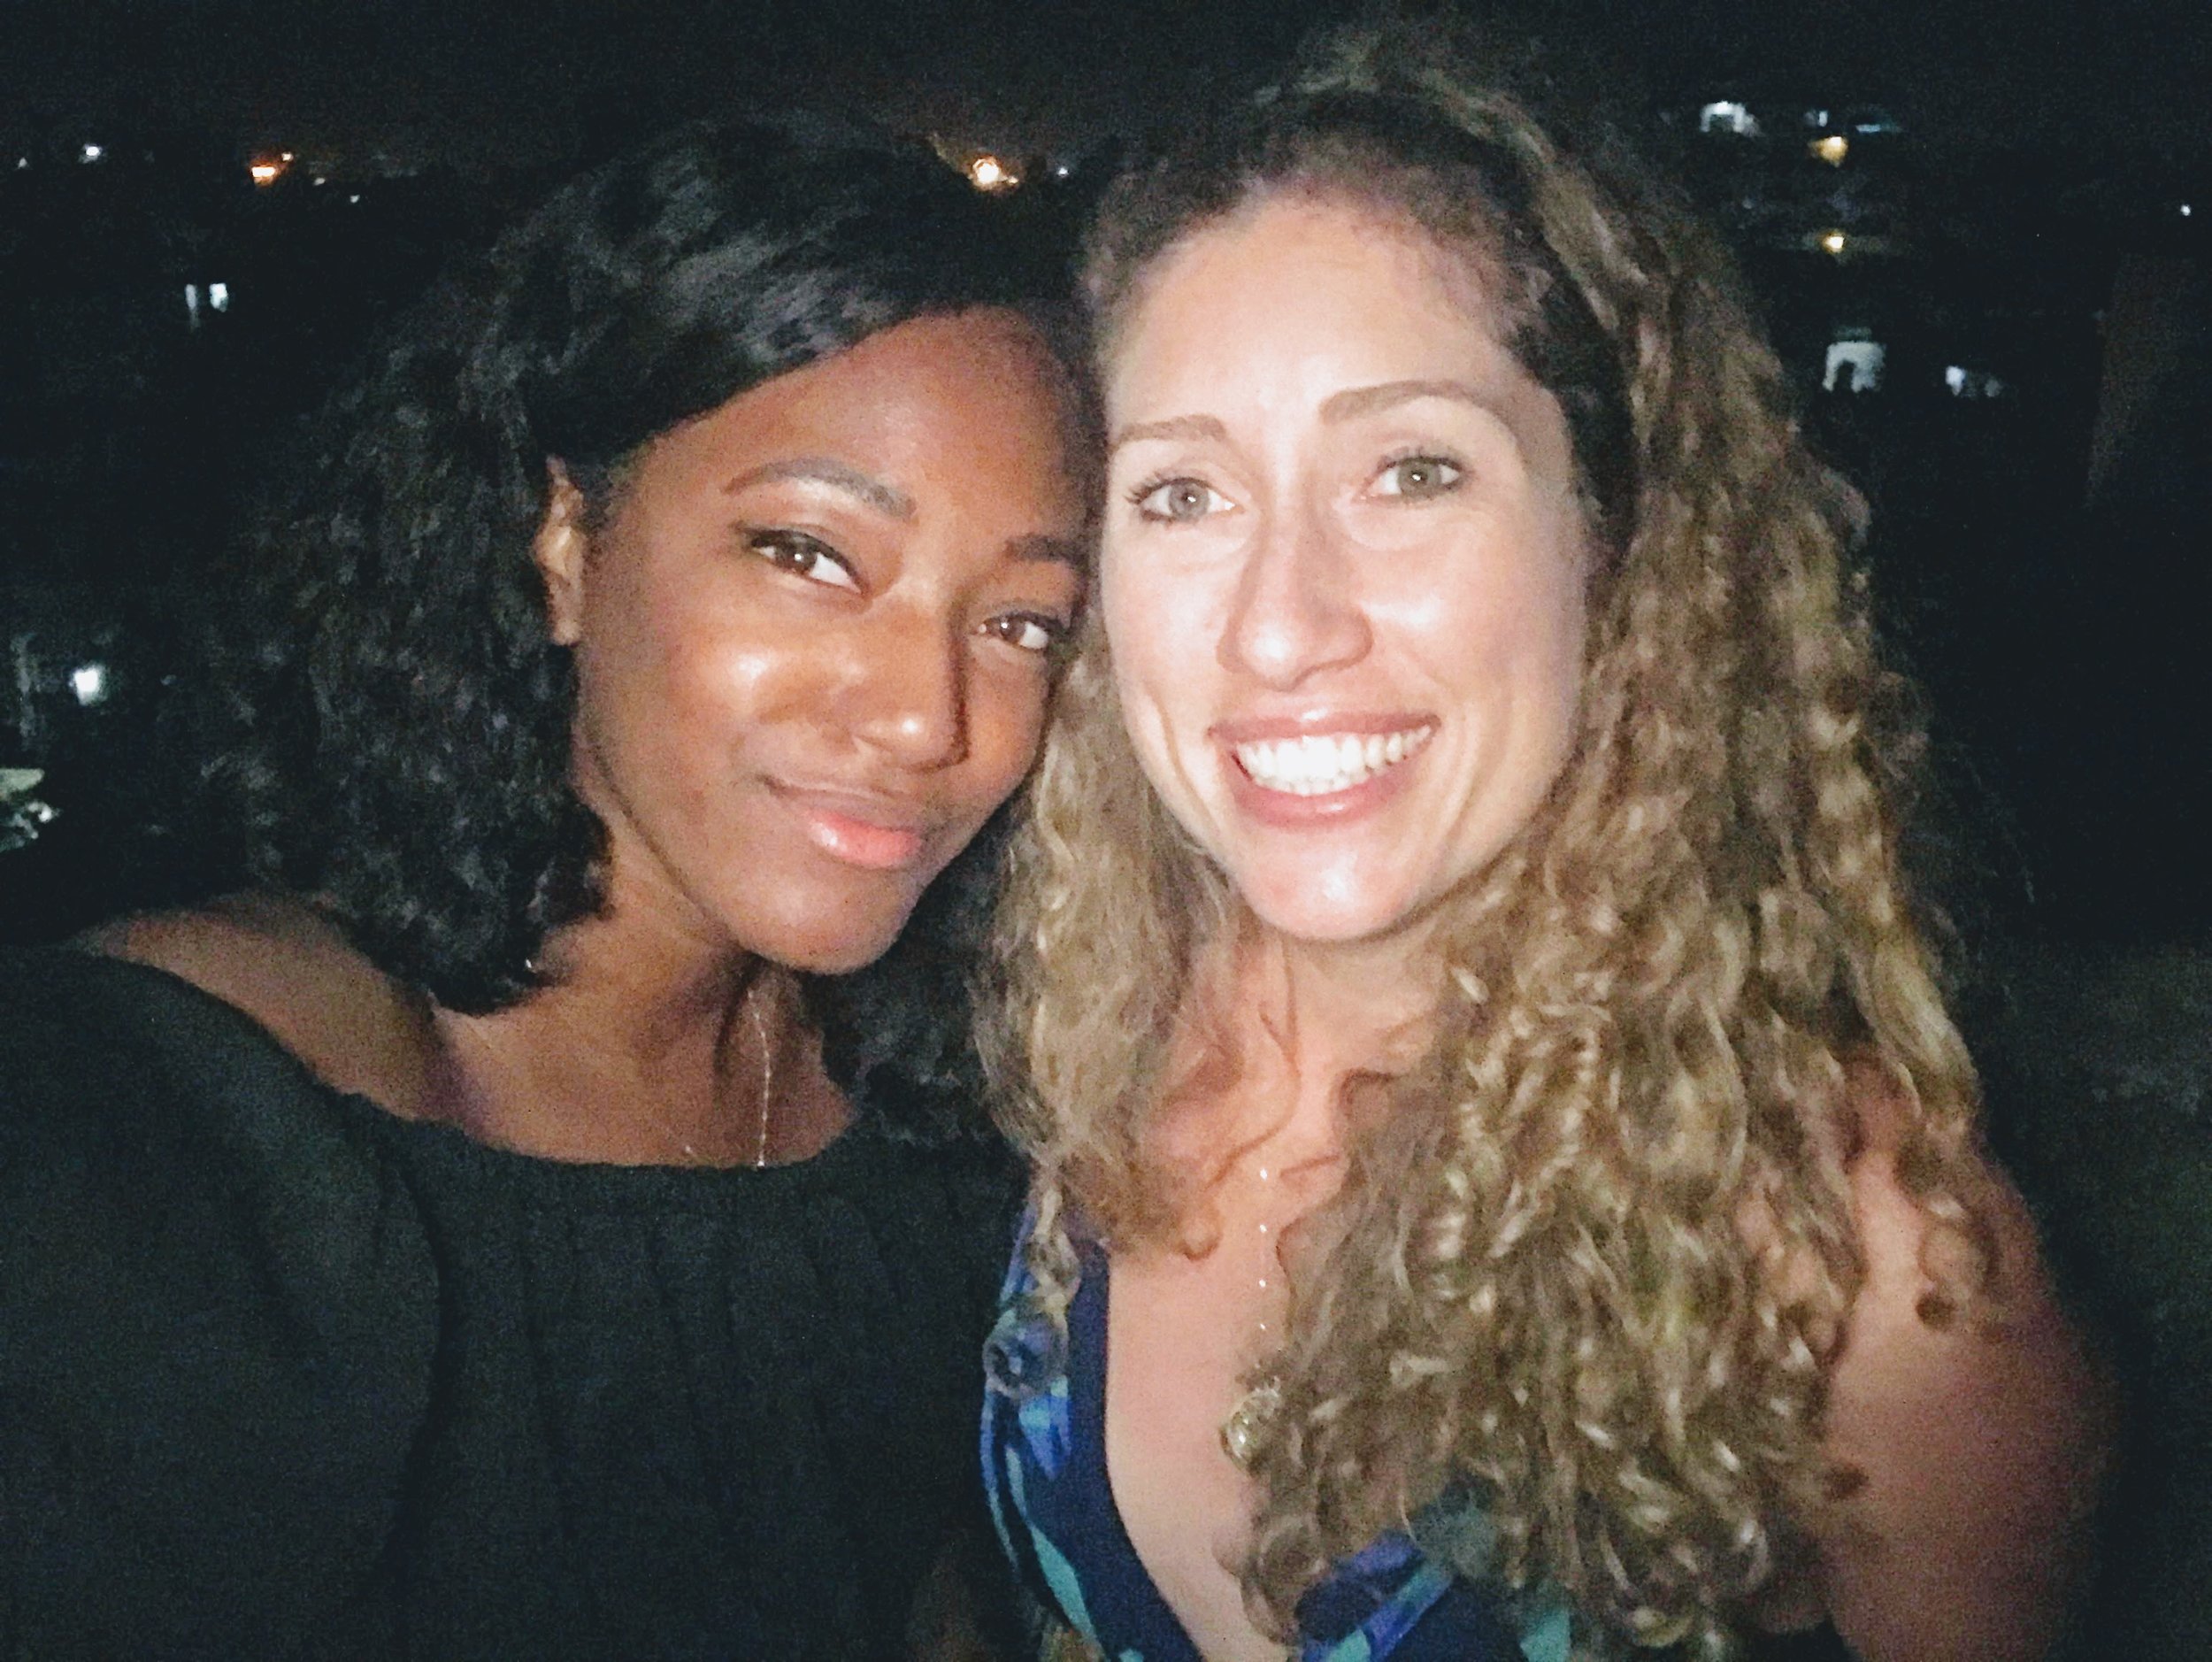 I met Davina on a walking tour in Havana, Cuba! We clicked so fast that everyone thought we'd known each other for years!